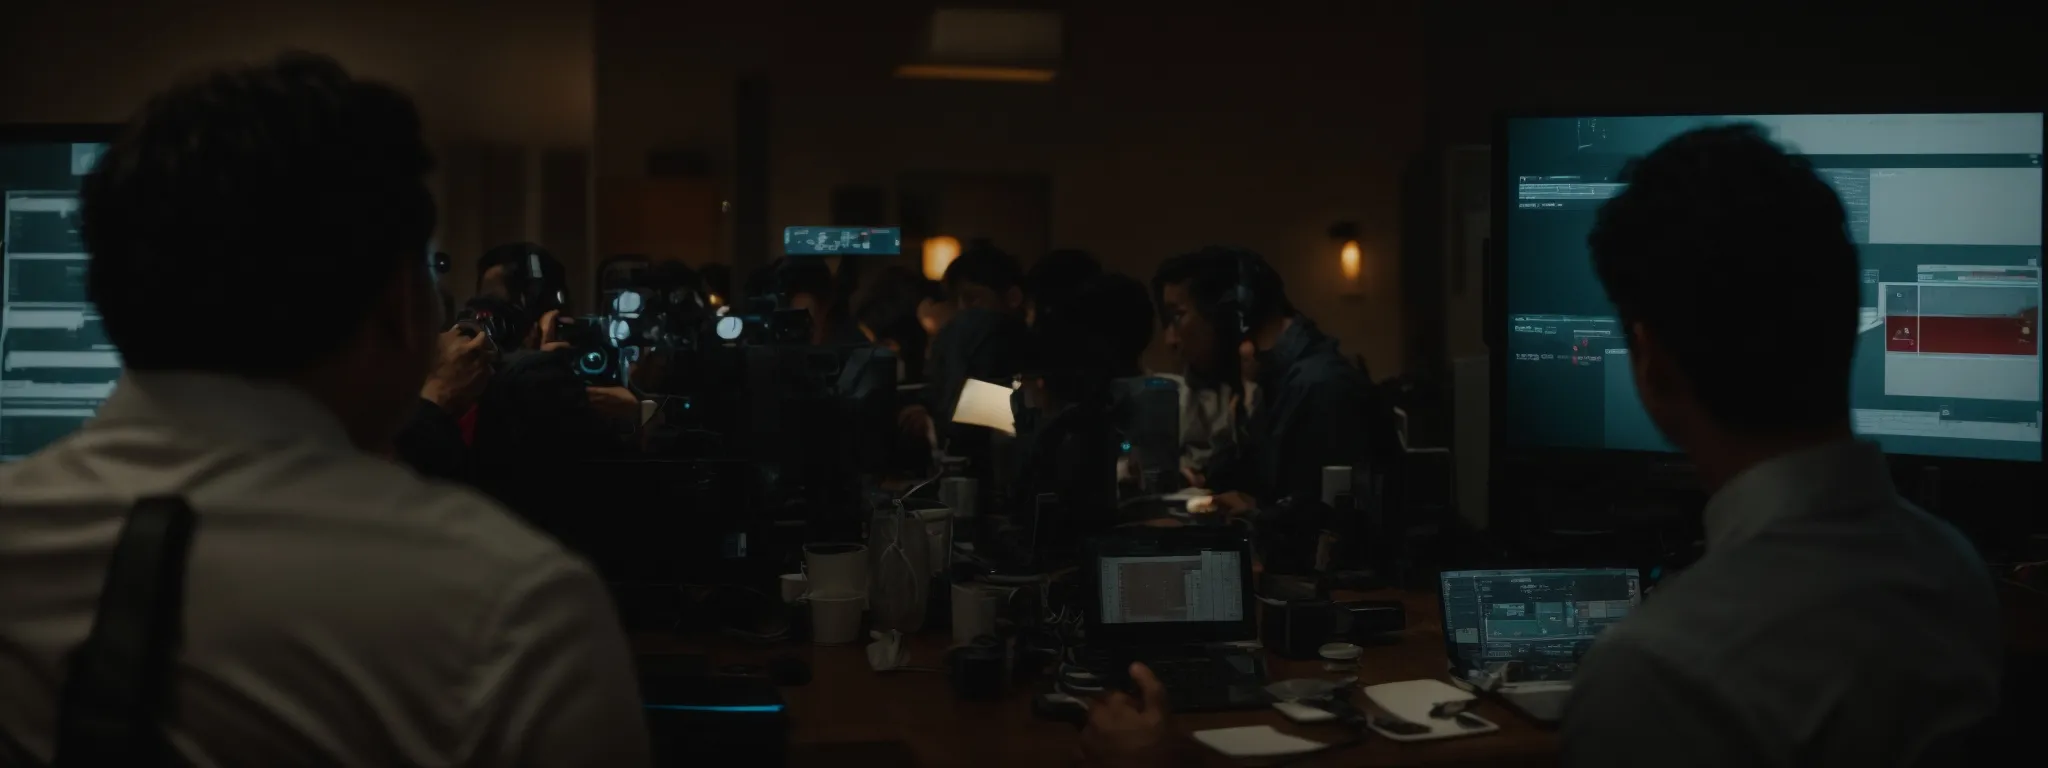 a group of professionals gather around a computer, exploring a sleek time tracking interface on the screen.